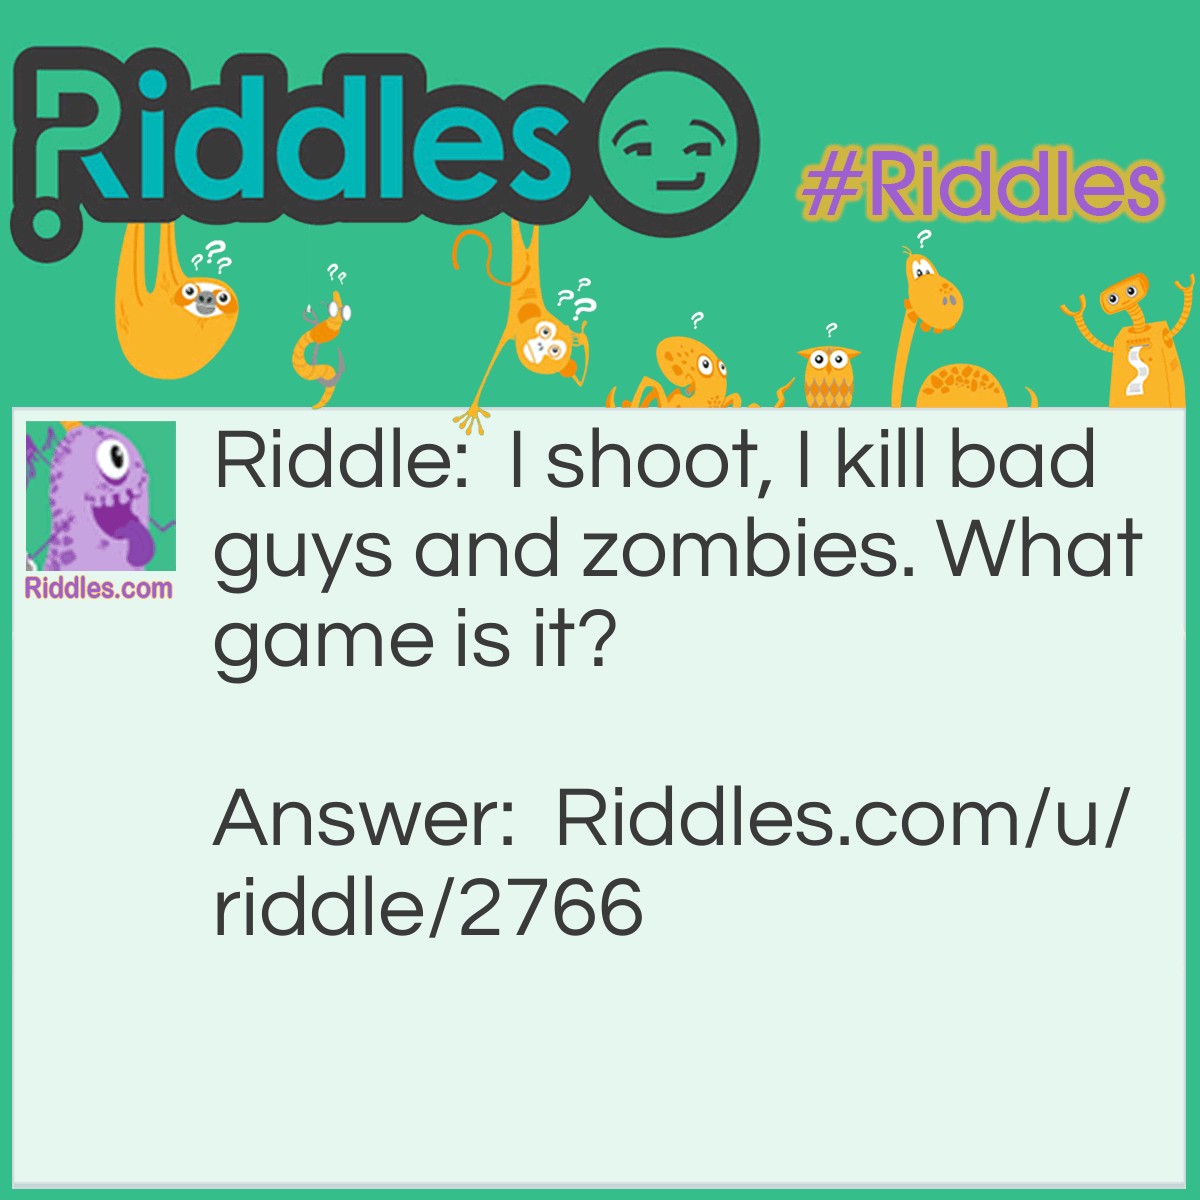 Riddle: I shoot, I kill bad guys and zombies. What game is it? Answer: Call of duty black ops.